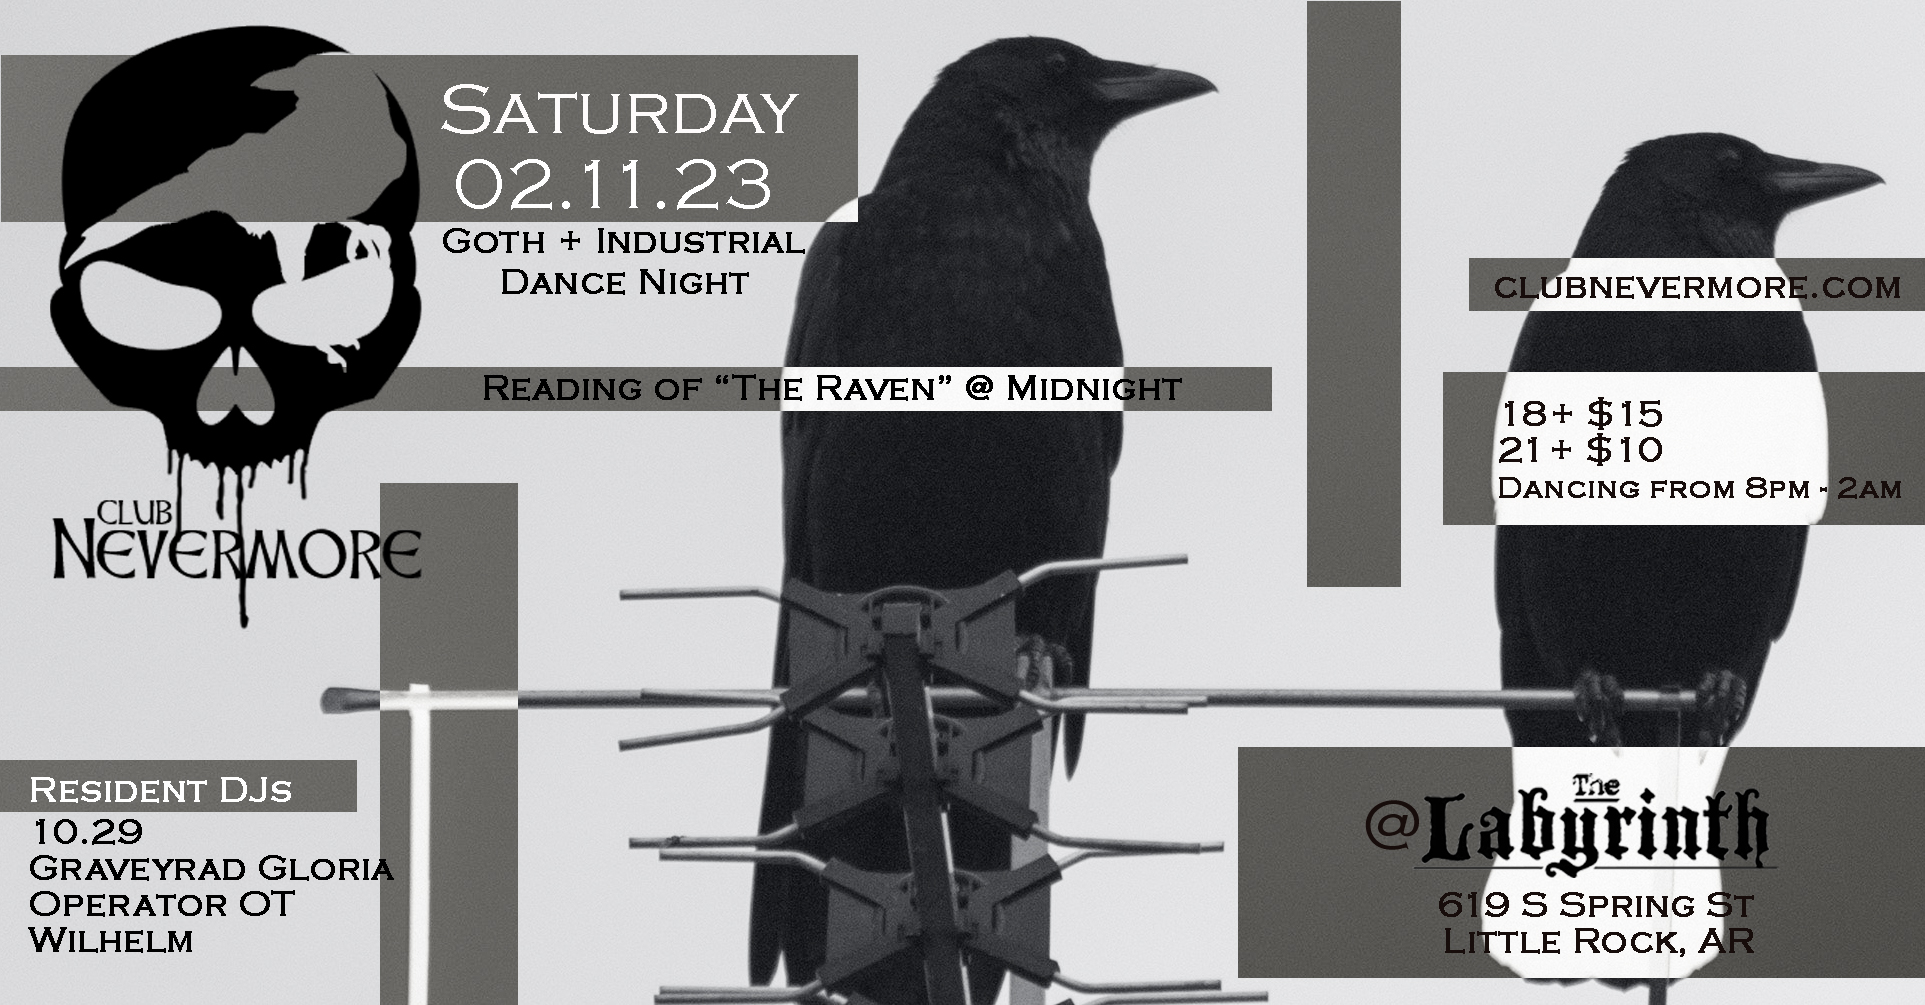 Flyer for Club Nevermore&rsquo;s &lsquo;The Raven&rsquo; Event. There are two ravens in the picture. The text reads, &lsquo;Club Nevermore. Saturday, February 11th 2023. Goth-industrial dance night. With Resident DJs DJ 10.29, DJ Graveyard Gloria, DJ Operator OT, and DJ Wilhelm, with a reading of Edgar Allan Poe&rsquo;s The Raven at midnight. At The Labyrinth, 619 South Spring Street in downtown Little Rock. Doors open at 8 PM. Admission is $15 for ages 18+, $10 for ages 21 and up. More info can be found at clubnevermore.com.&rsquo;